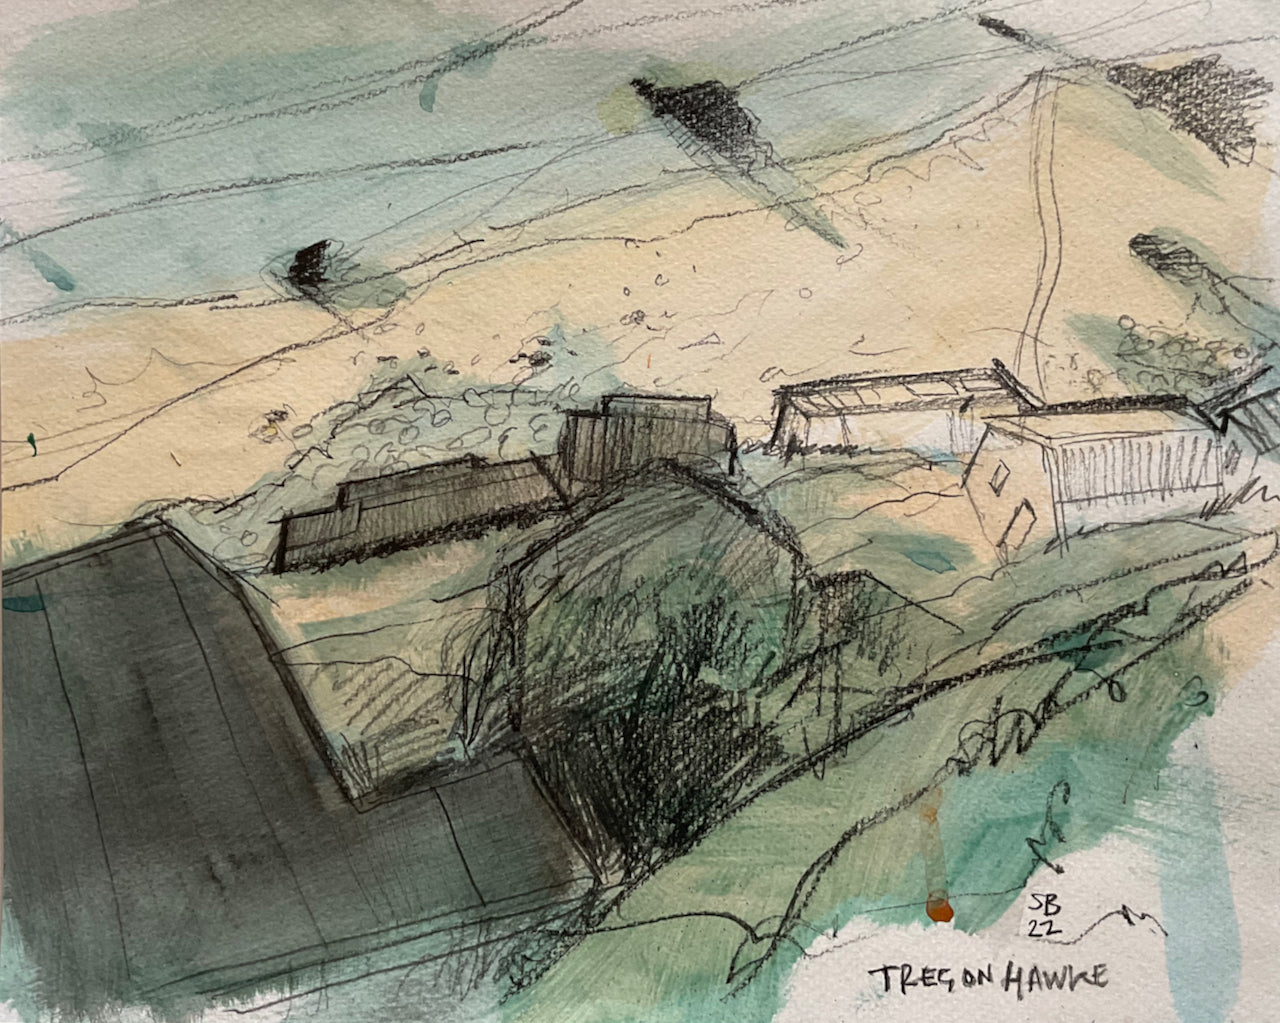 View over Tregonhawke in pencil, and shades of cream, green and grey by artist Steven Buckler